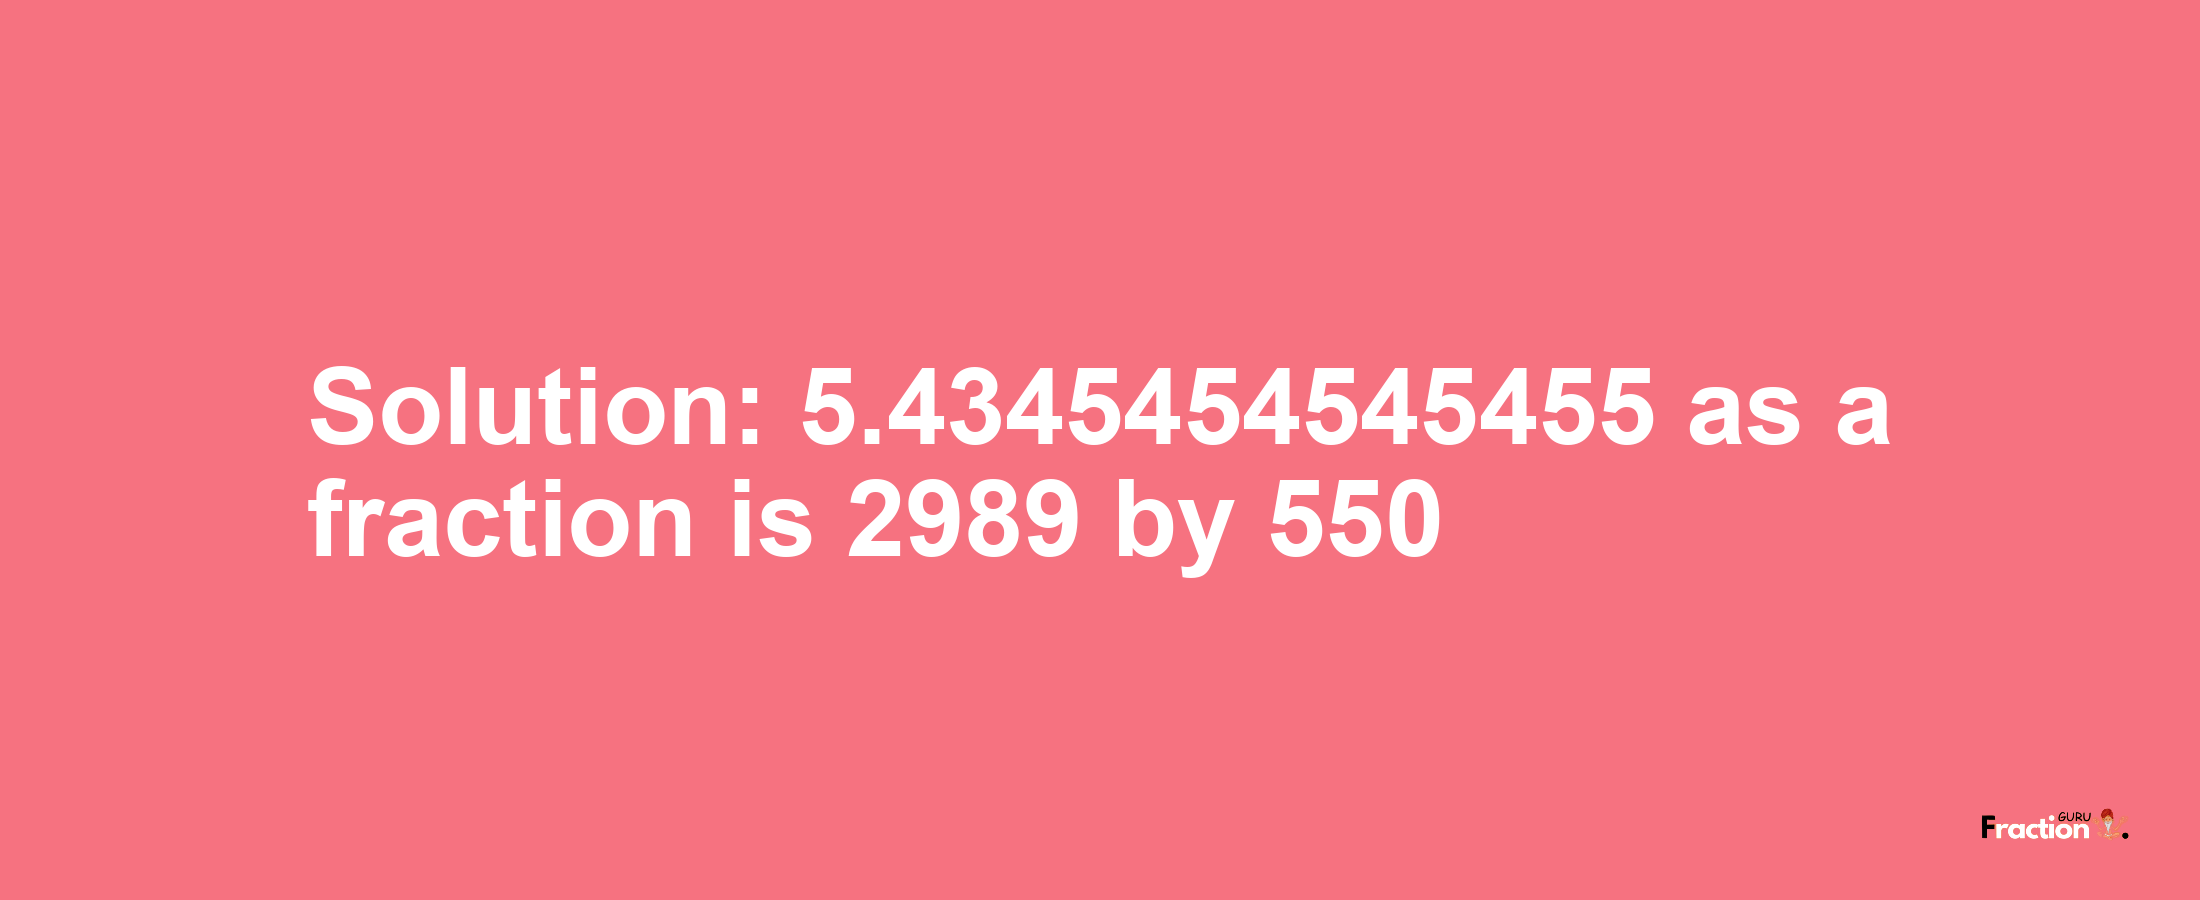 Solution:5.4345454545455 as a fraction is 2989/550